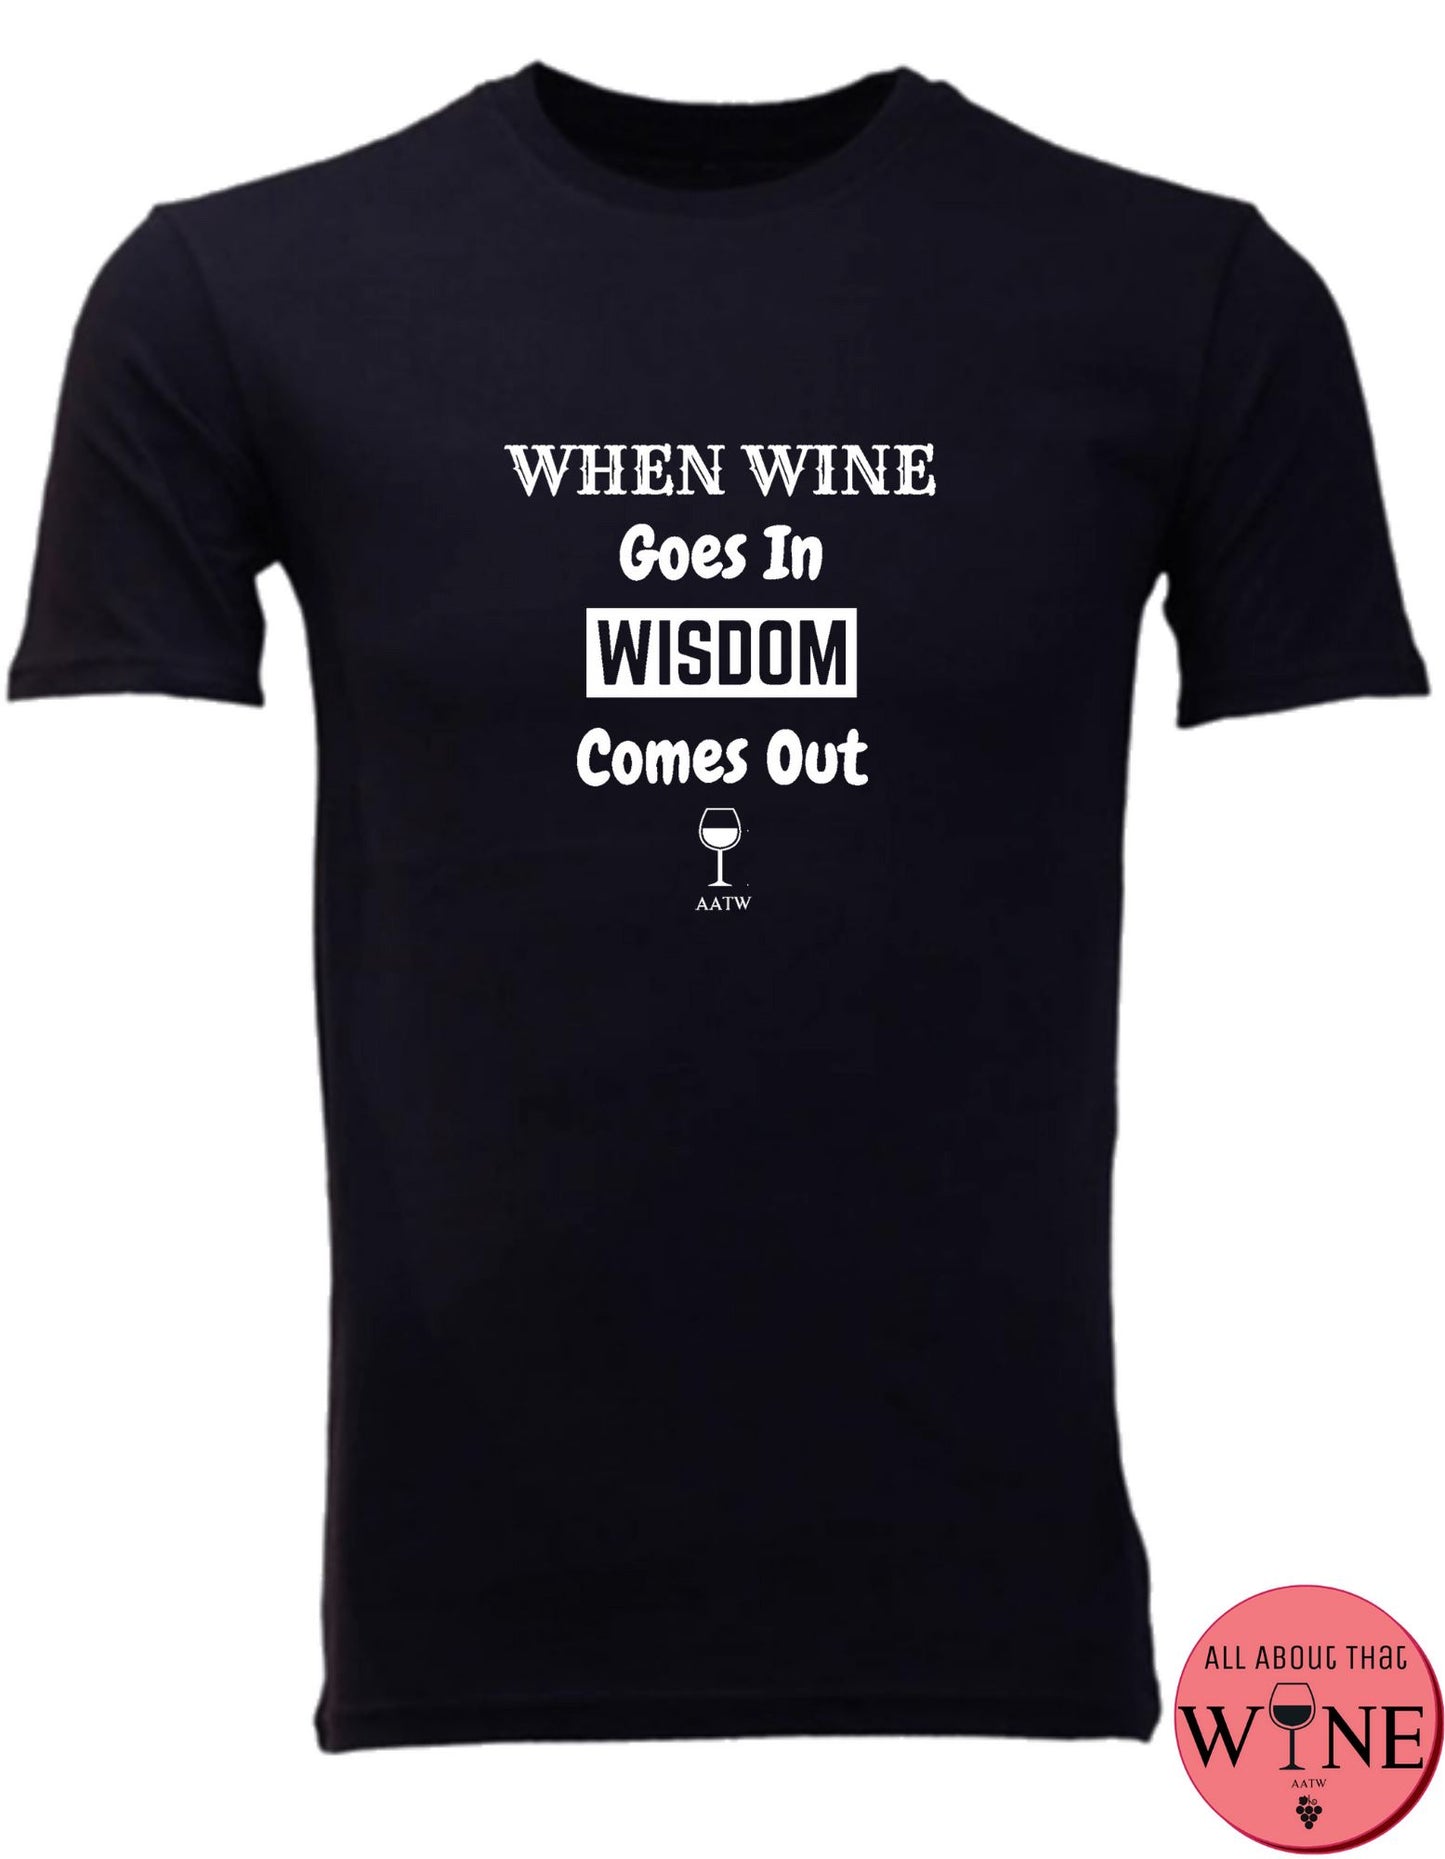 When Wine Goes In - Men's T-shirt S Black with white